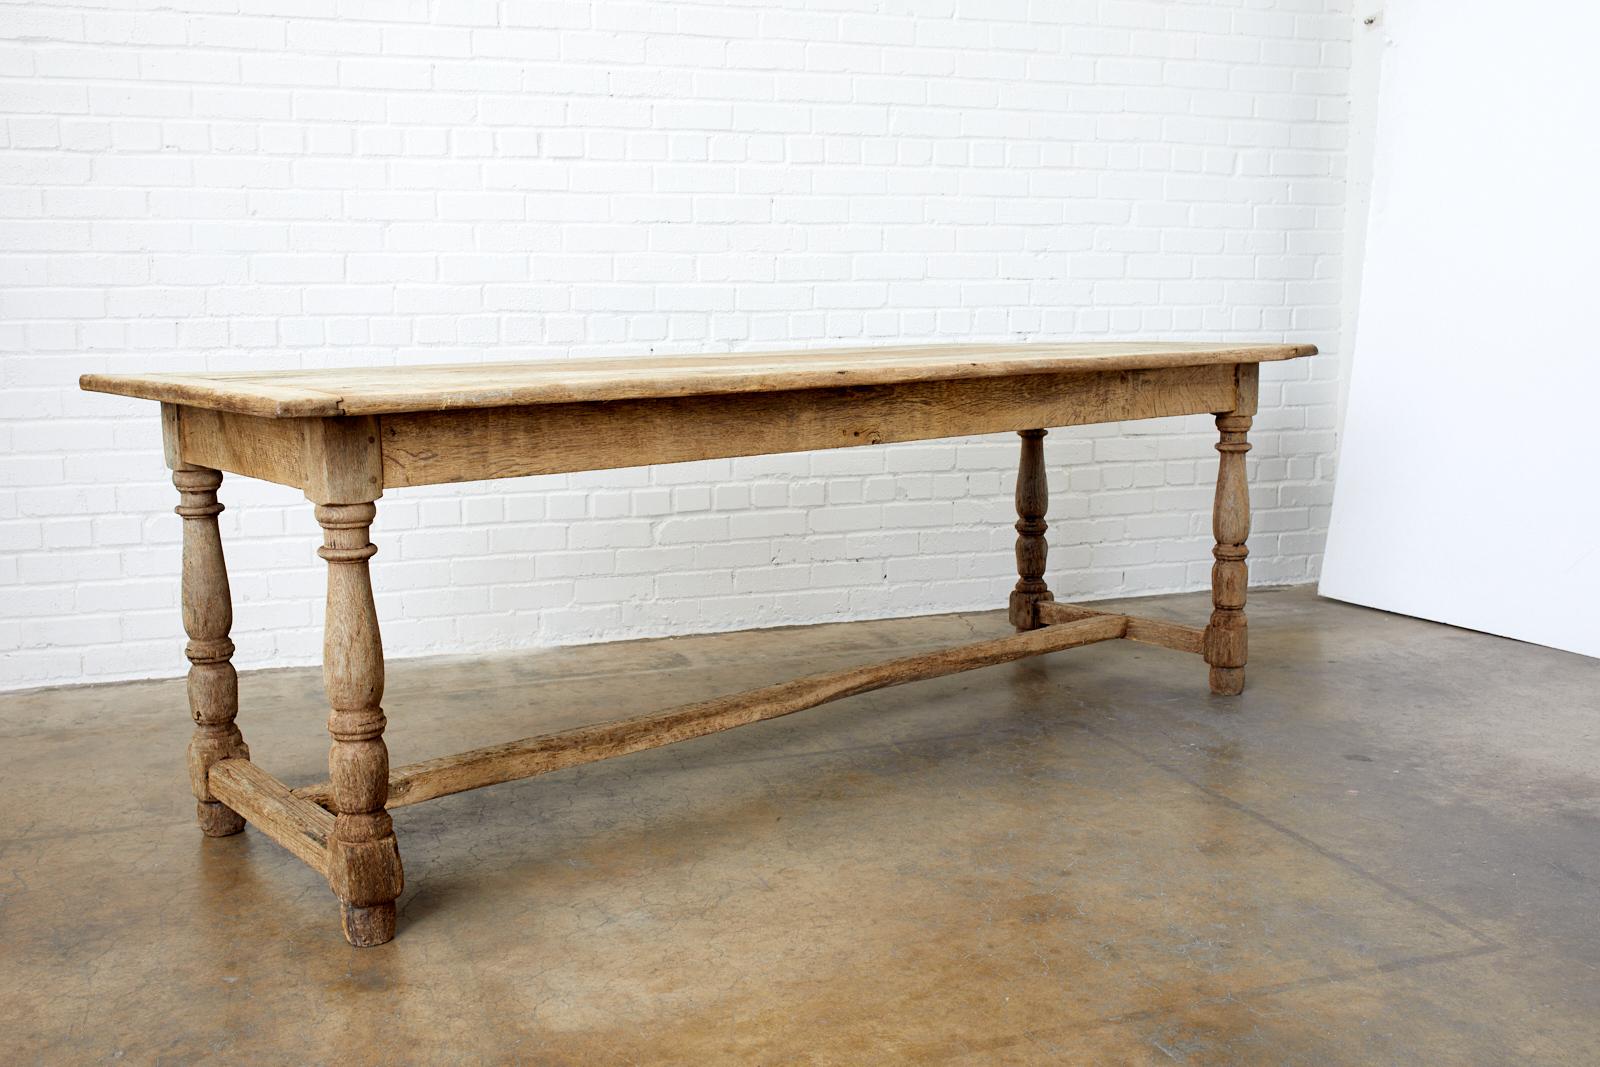 Spectacular 19th century country French farmhouse dining table featuring a bleached oak distressed finish. Made in a trestle style with a plank top and turned legs. Excellent peg joinery and craftsmanship with an aged patina on the oak that